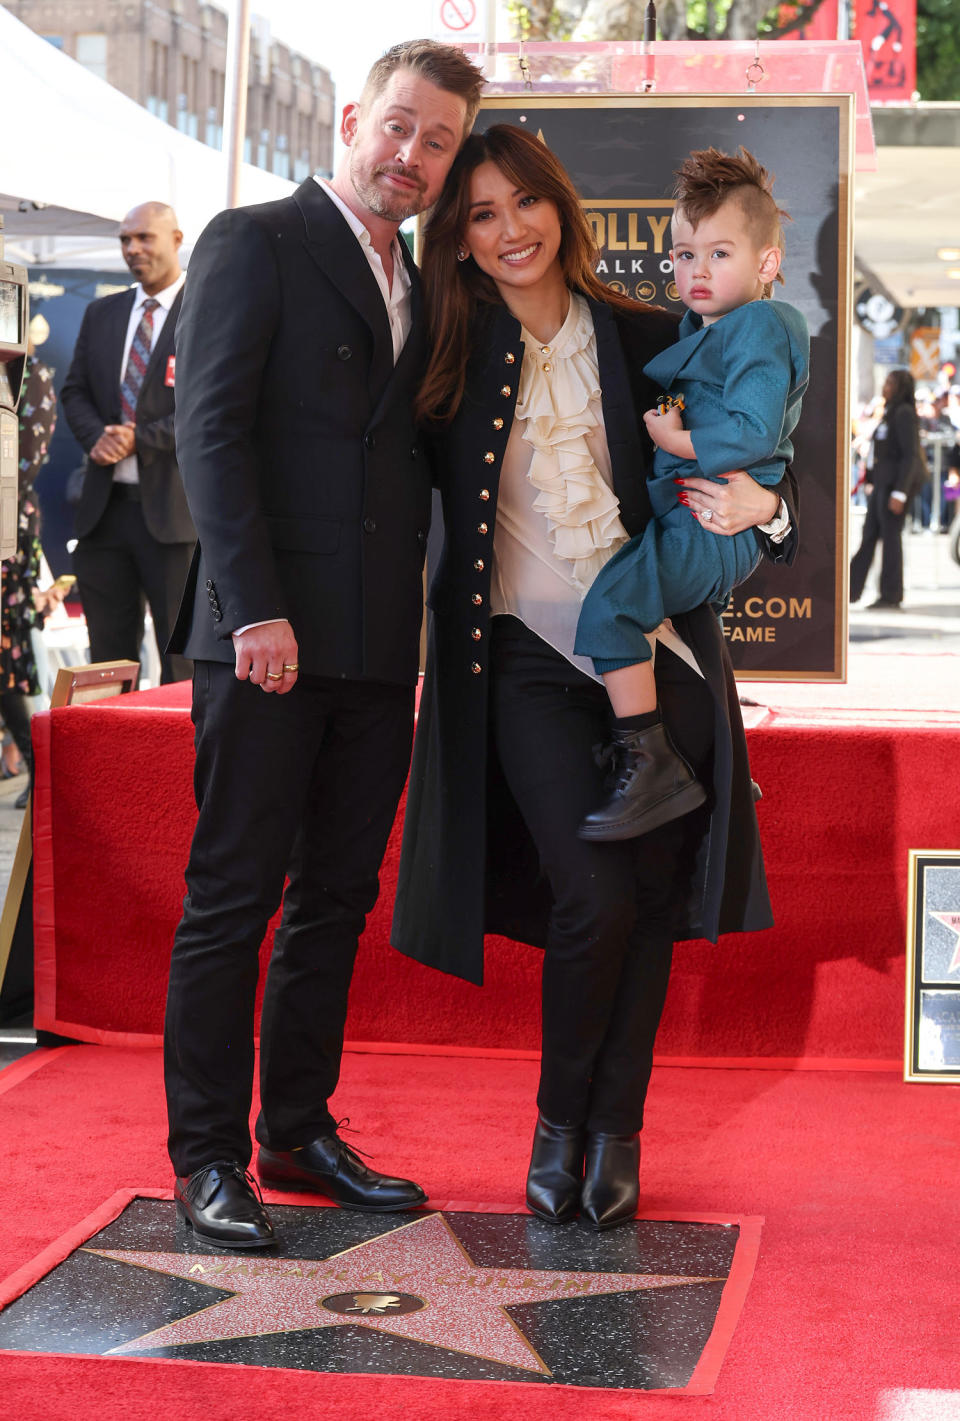 Macaulay Culkin, Brenda Song and son Dakota at his Hollywood Walk of Fame ceremony. (Amy Sussman / Getty Images)